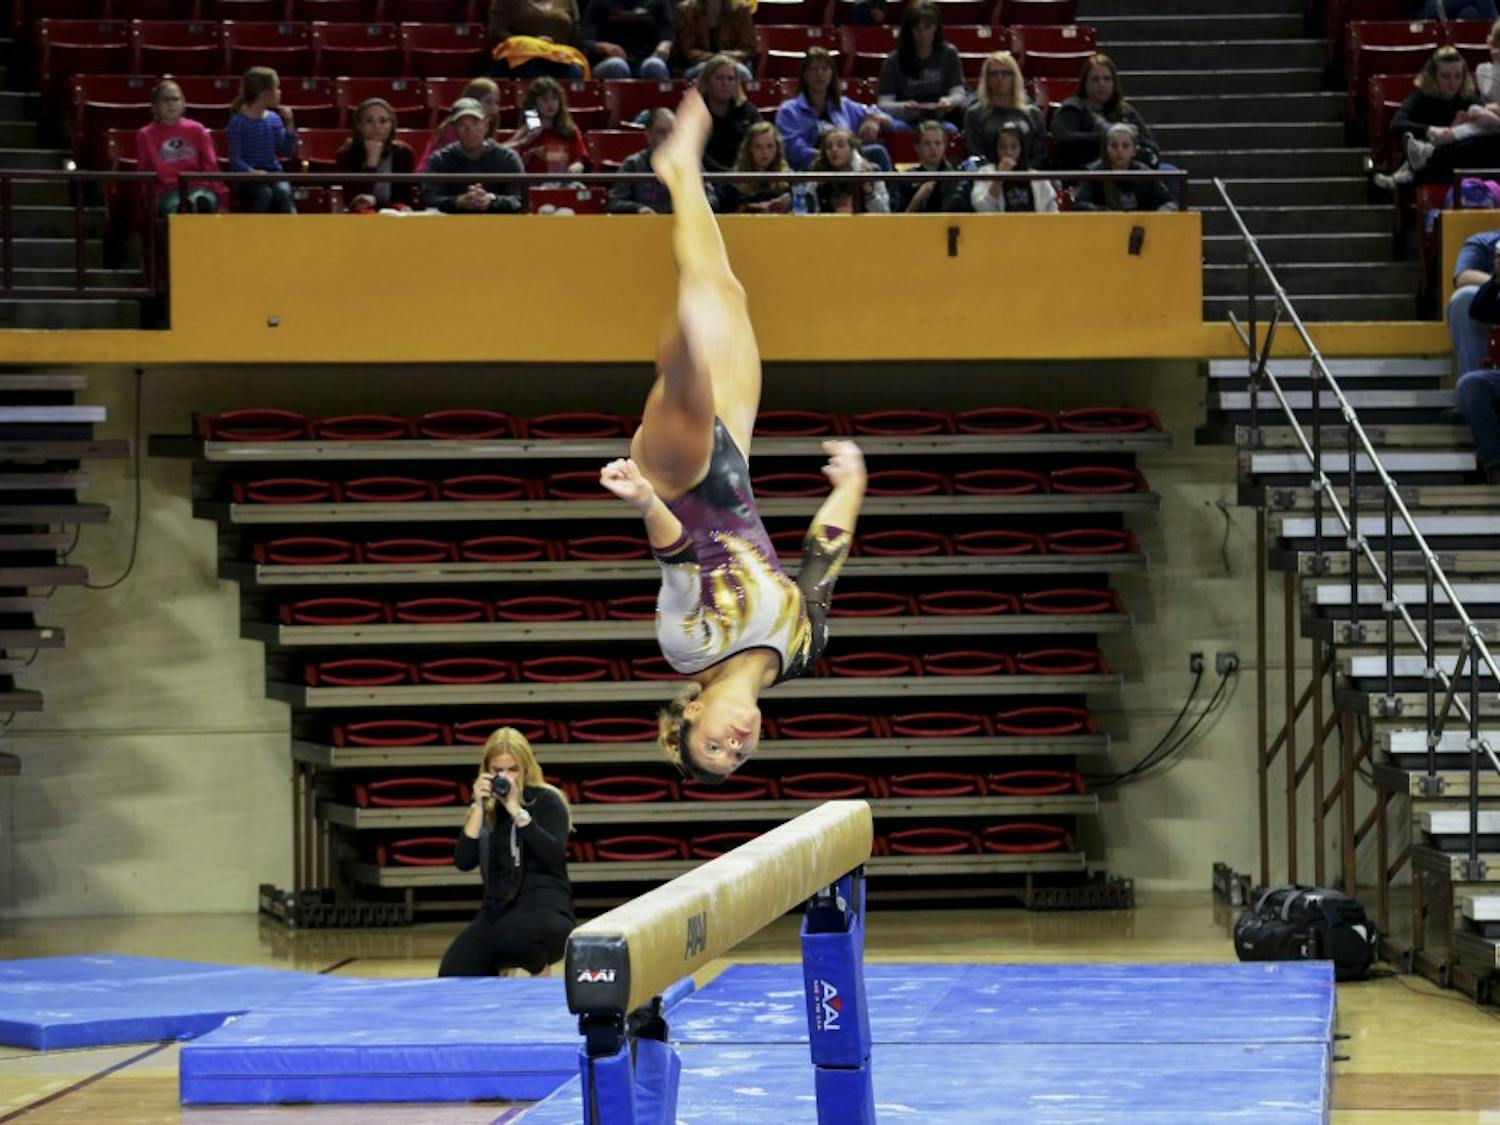 ASU junior Allie Salas performs her balance beam routine against Stanford on Saturday Jan. 31, 2015, at Wells Fargo Arena in Tempe. Salas finished her routine with a score of 9.725. (Krista Tillman/ The State Press)